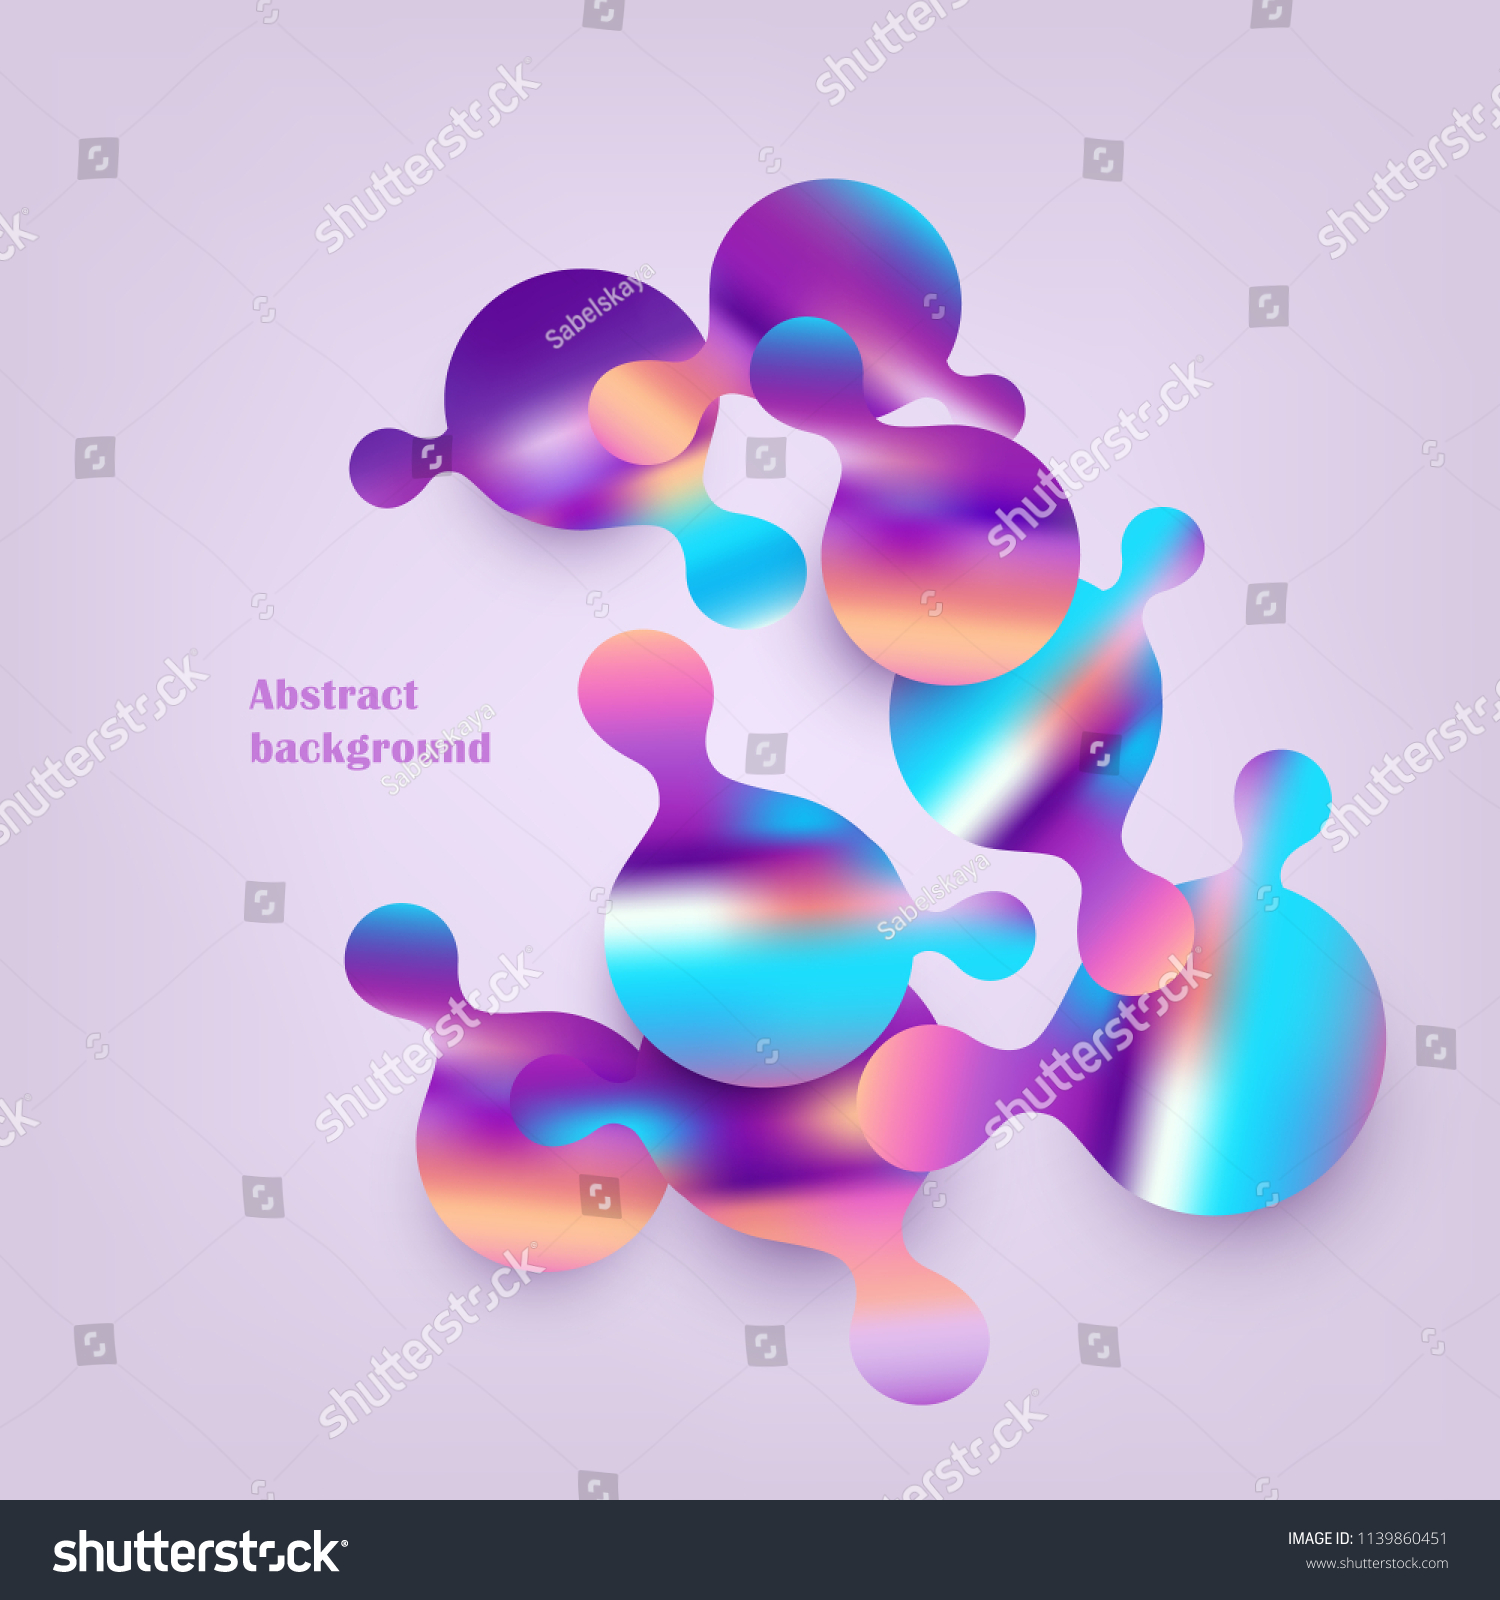 Banner with bright gradient color rounded shapes isolated on gray background. Abstract decorative bubbles with fluid color and forms in vector illustration with copy space. #1139860451